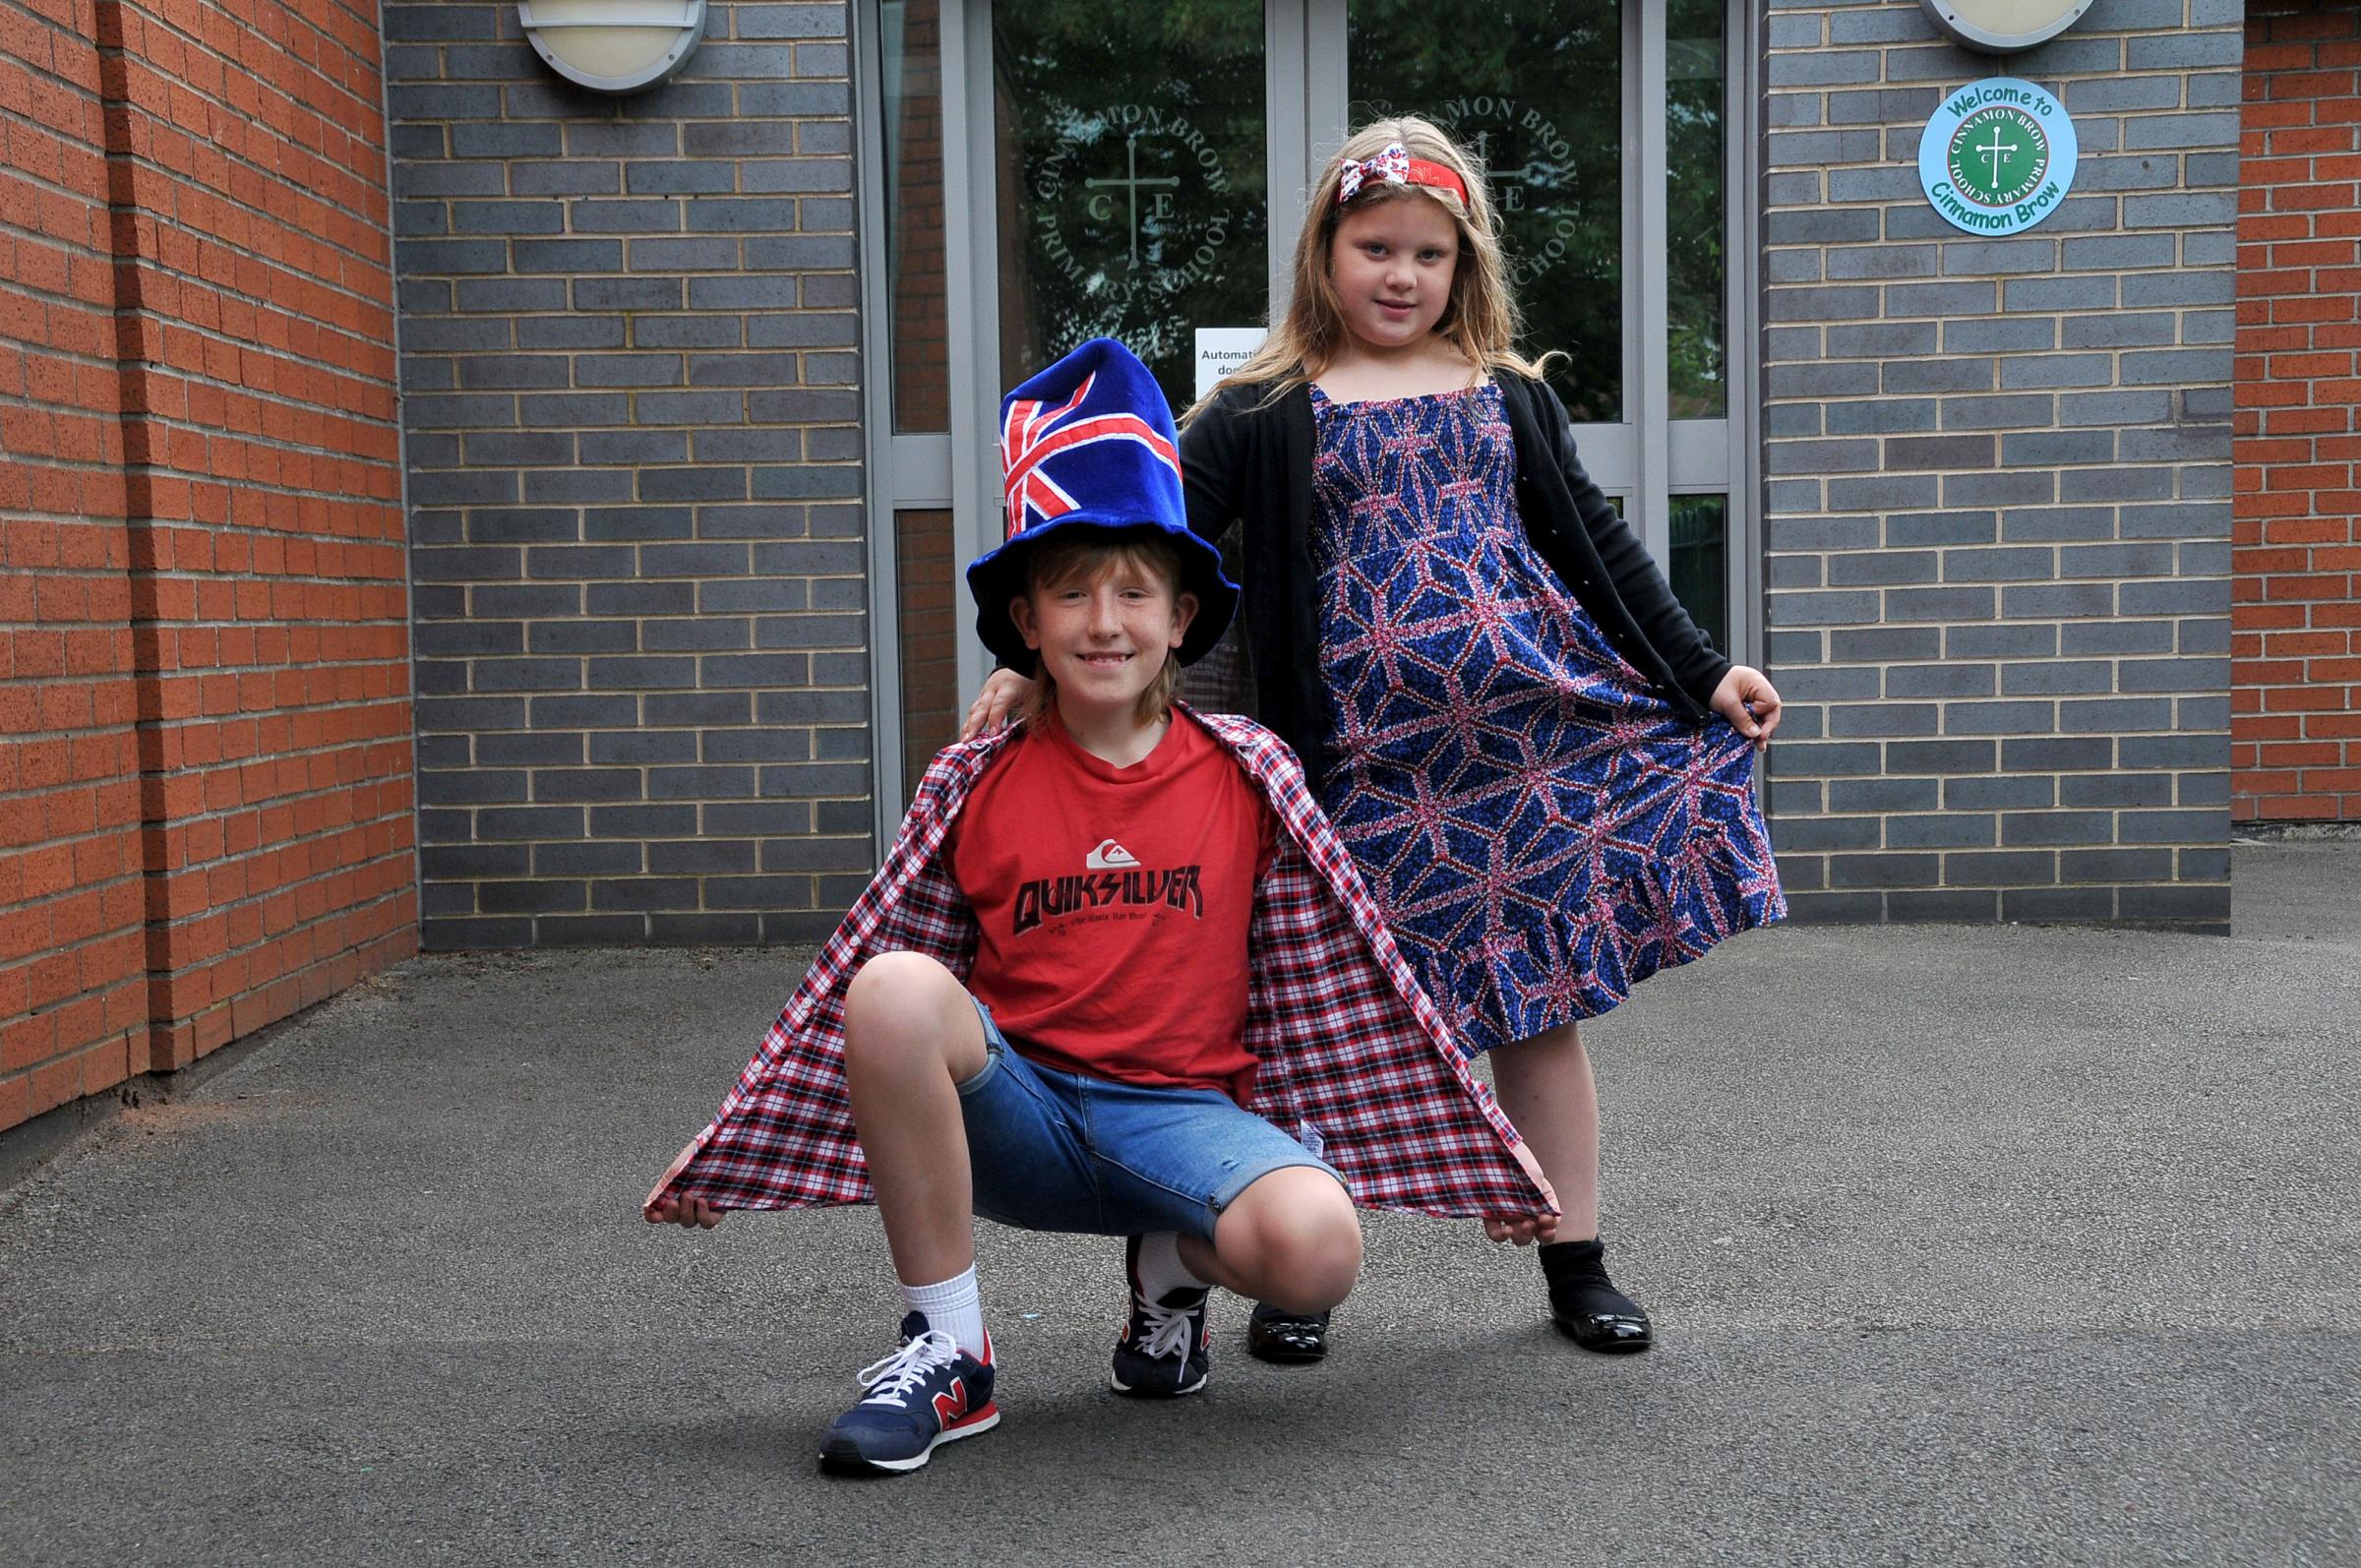 Cinnamon Brow pupils George Coates and MacKenzie Paton looking great in their Jubilee outifts